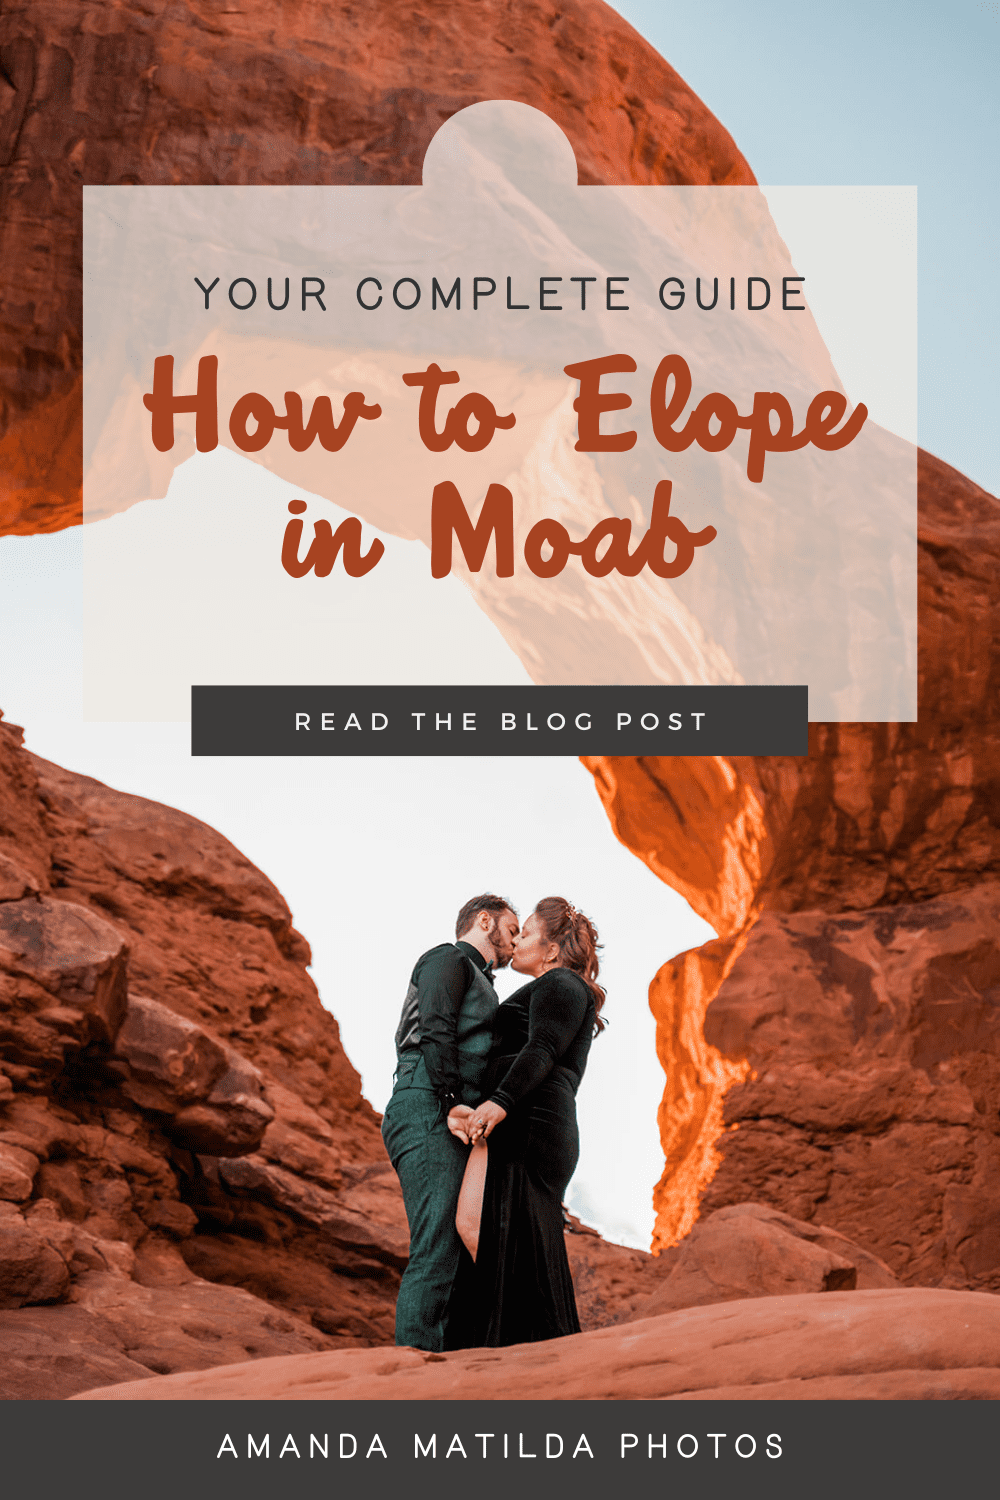 How to elope in Moab by Amanda Matilda Photography